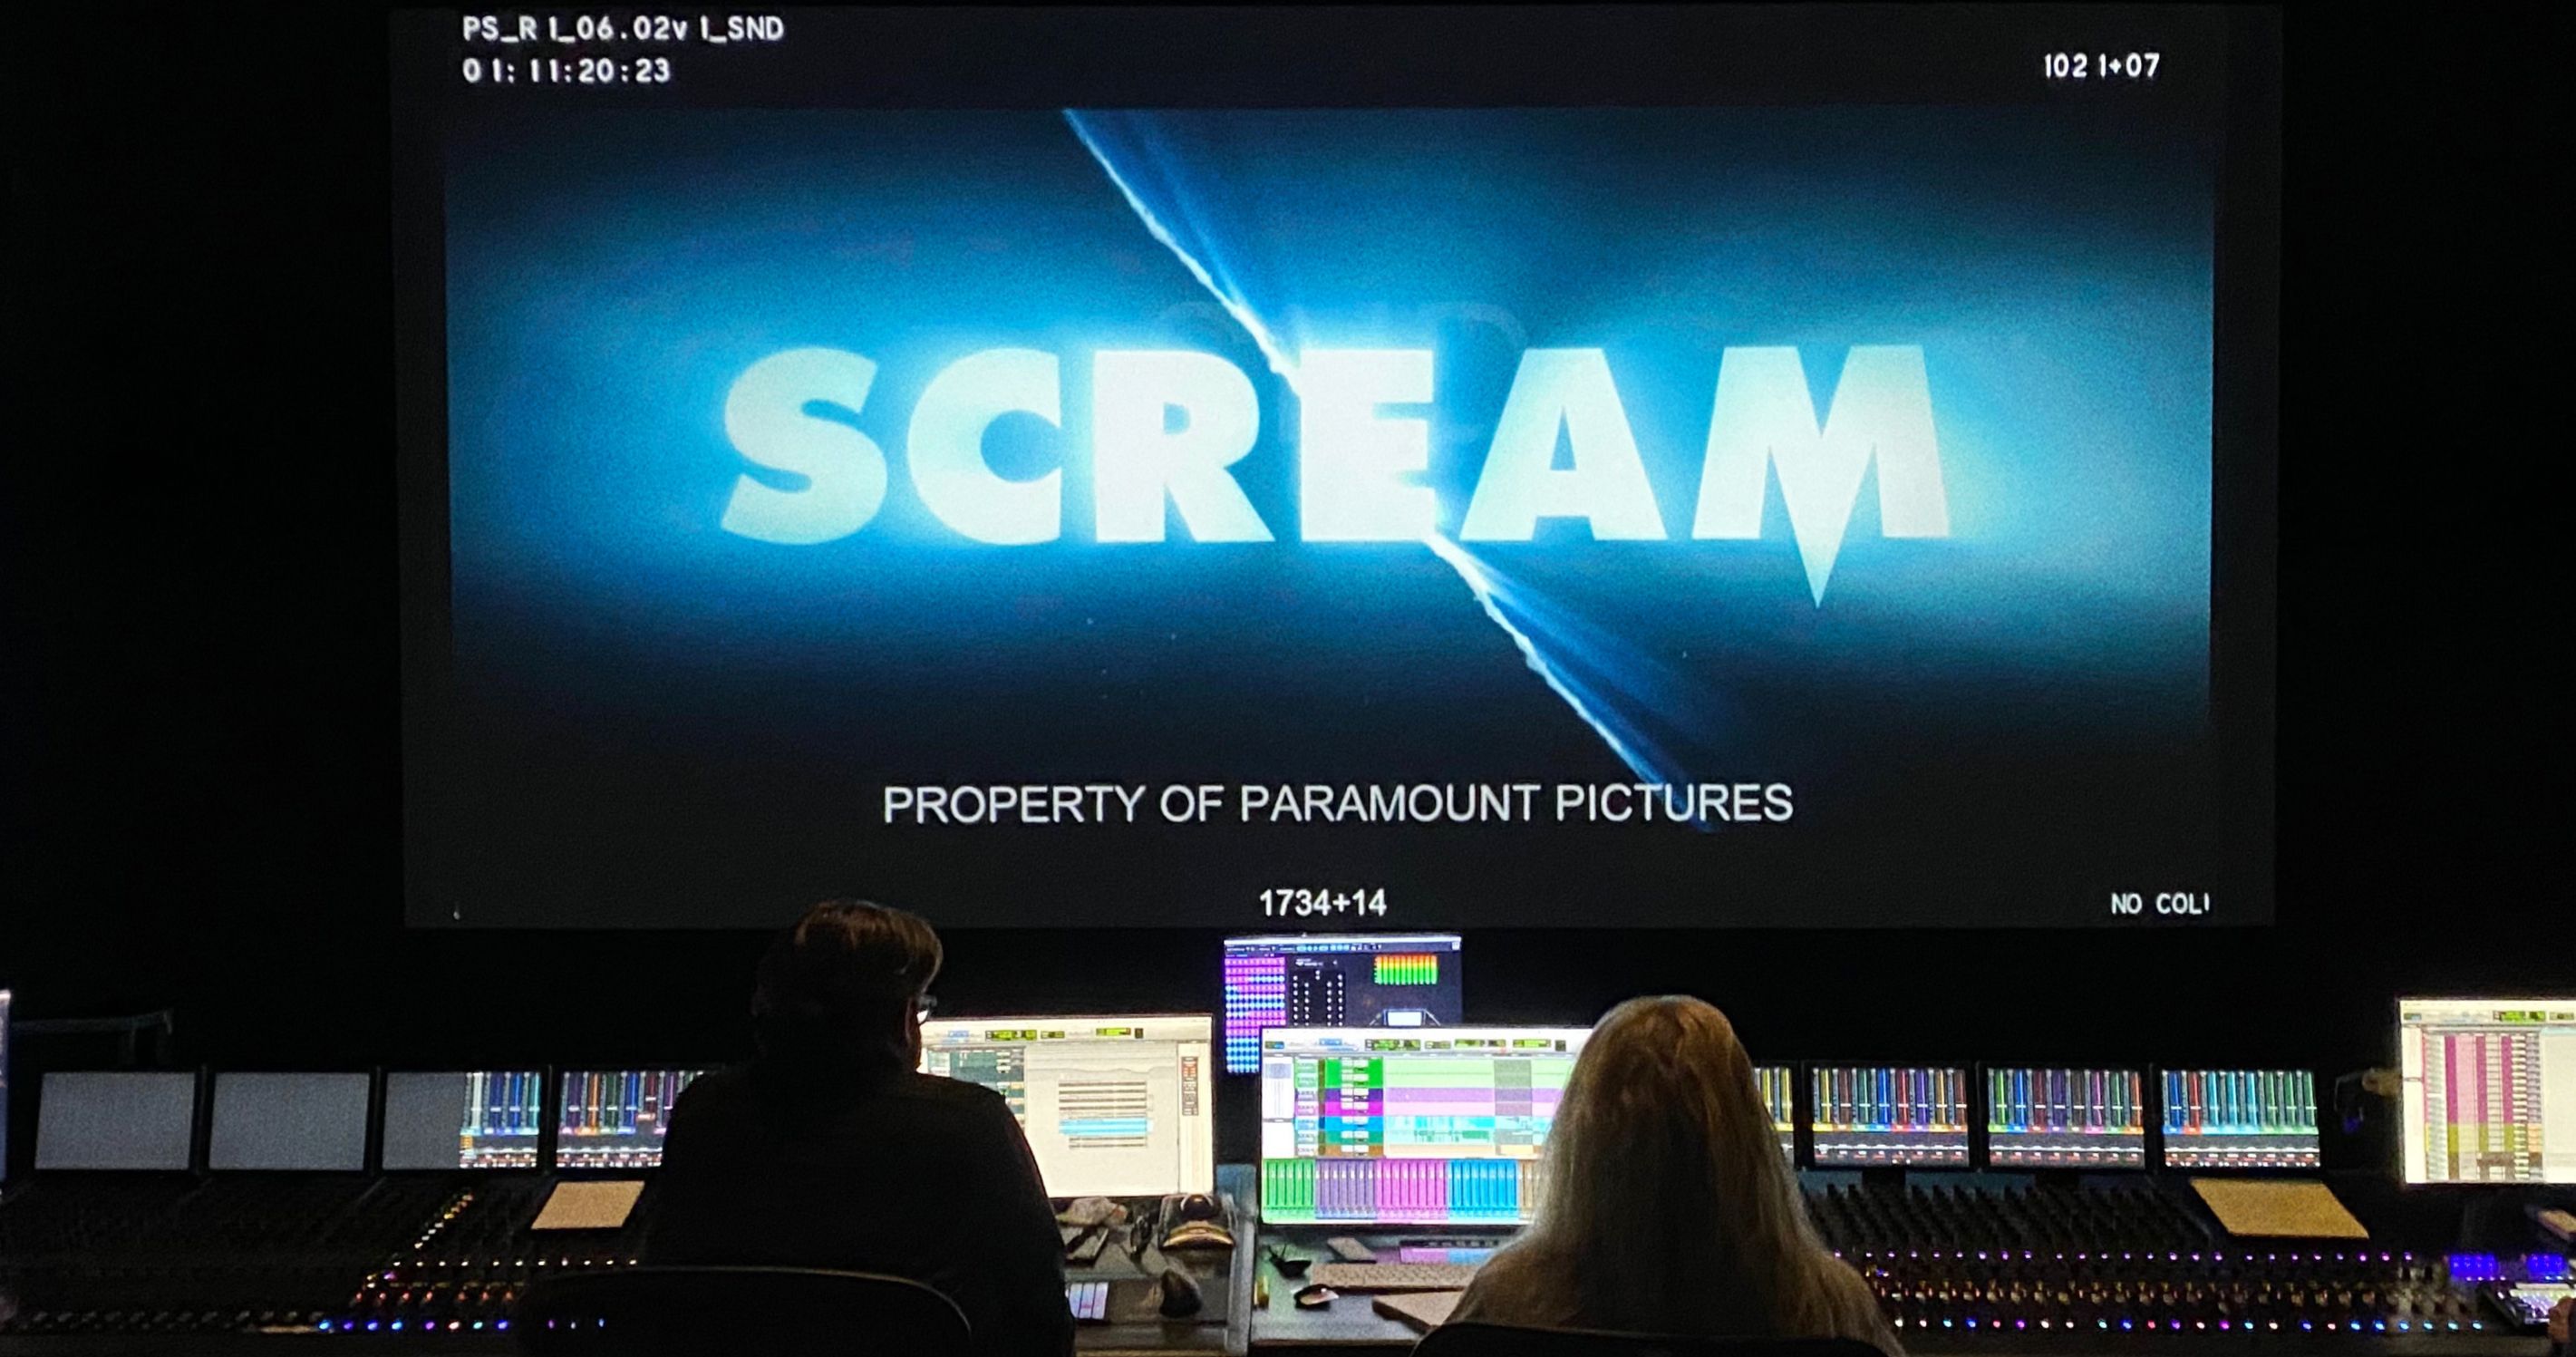 New Scream Movie Is Complete, Directors Share a Sneak Peek at Opening Credits